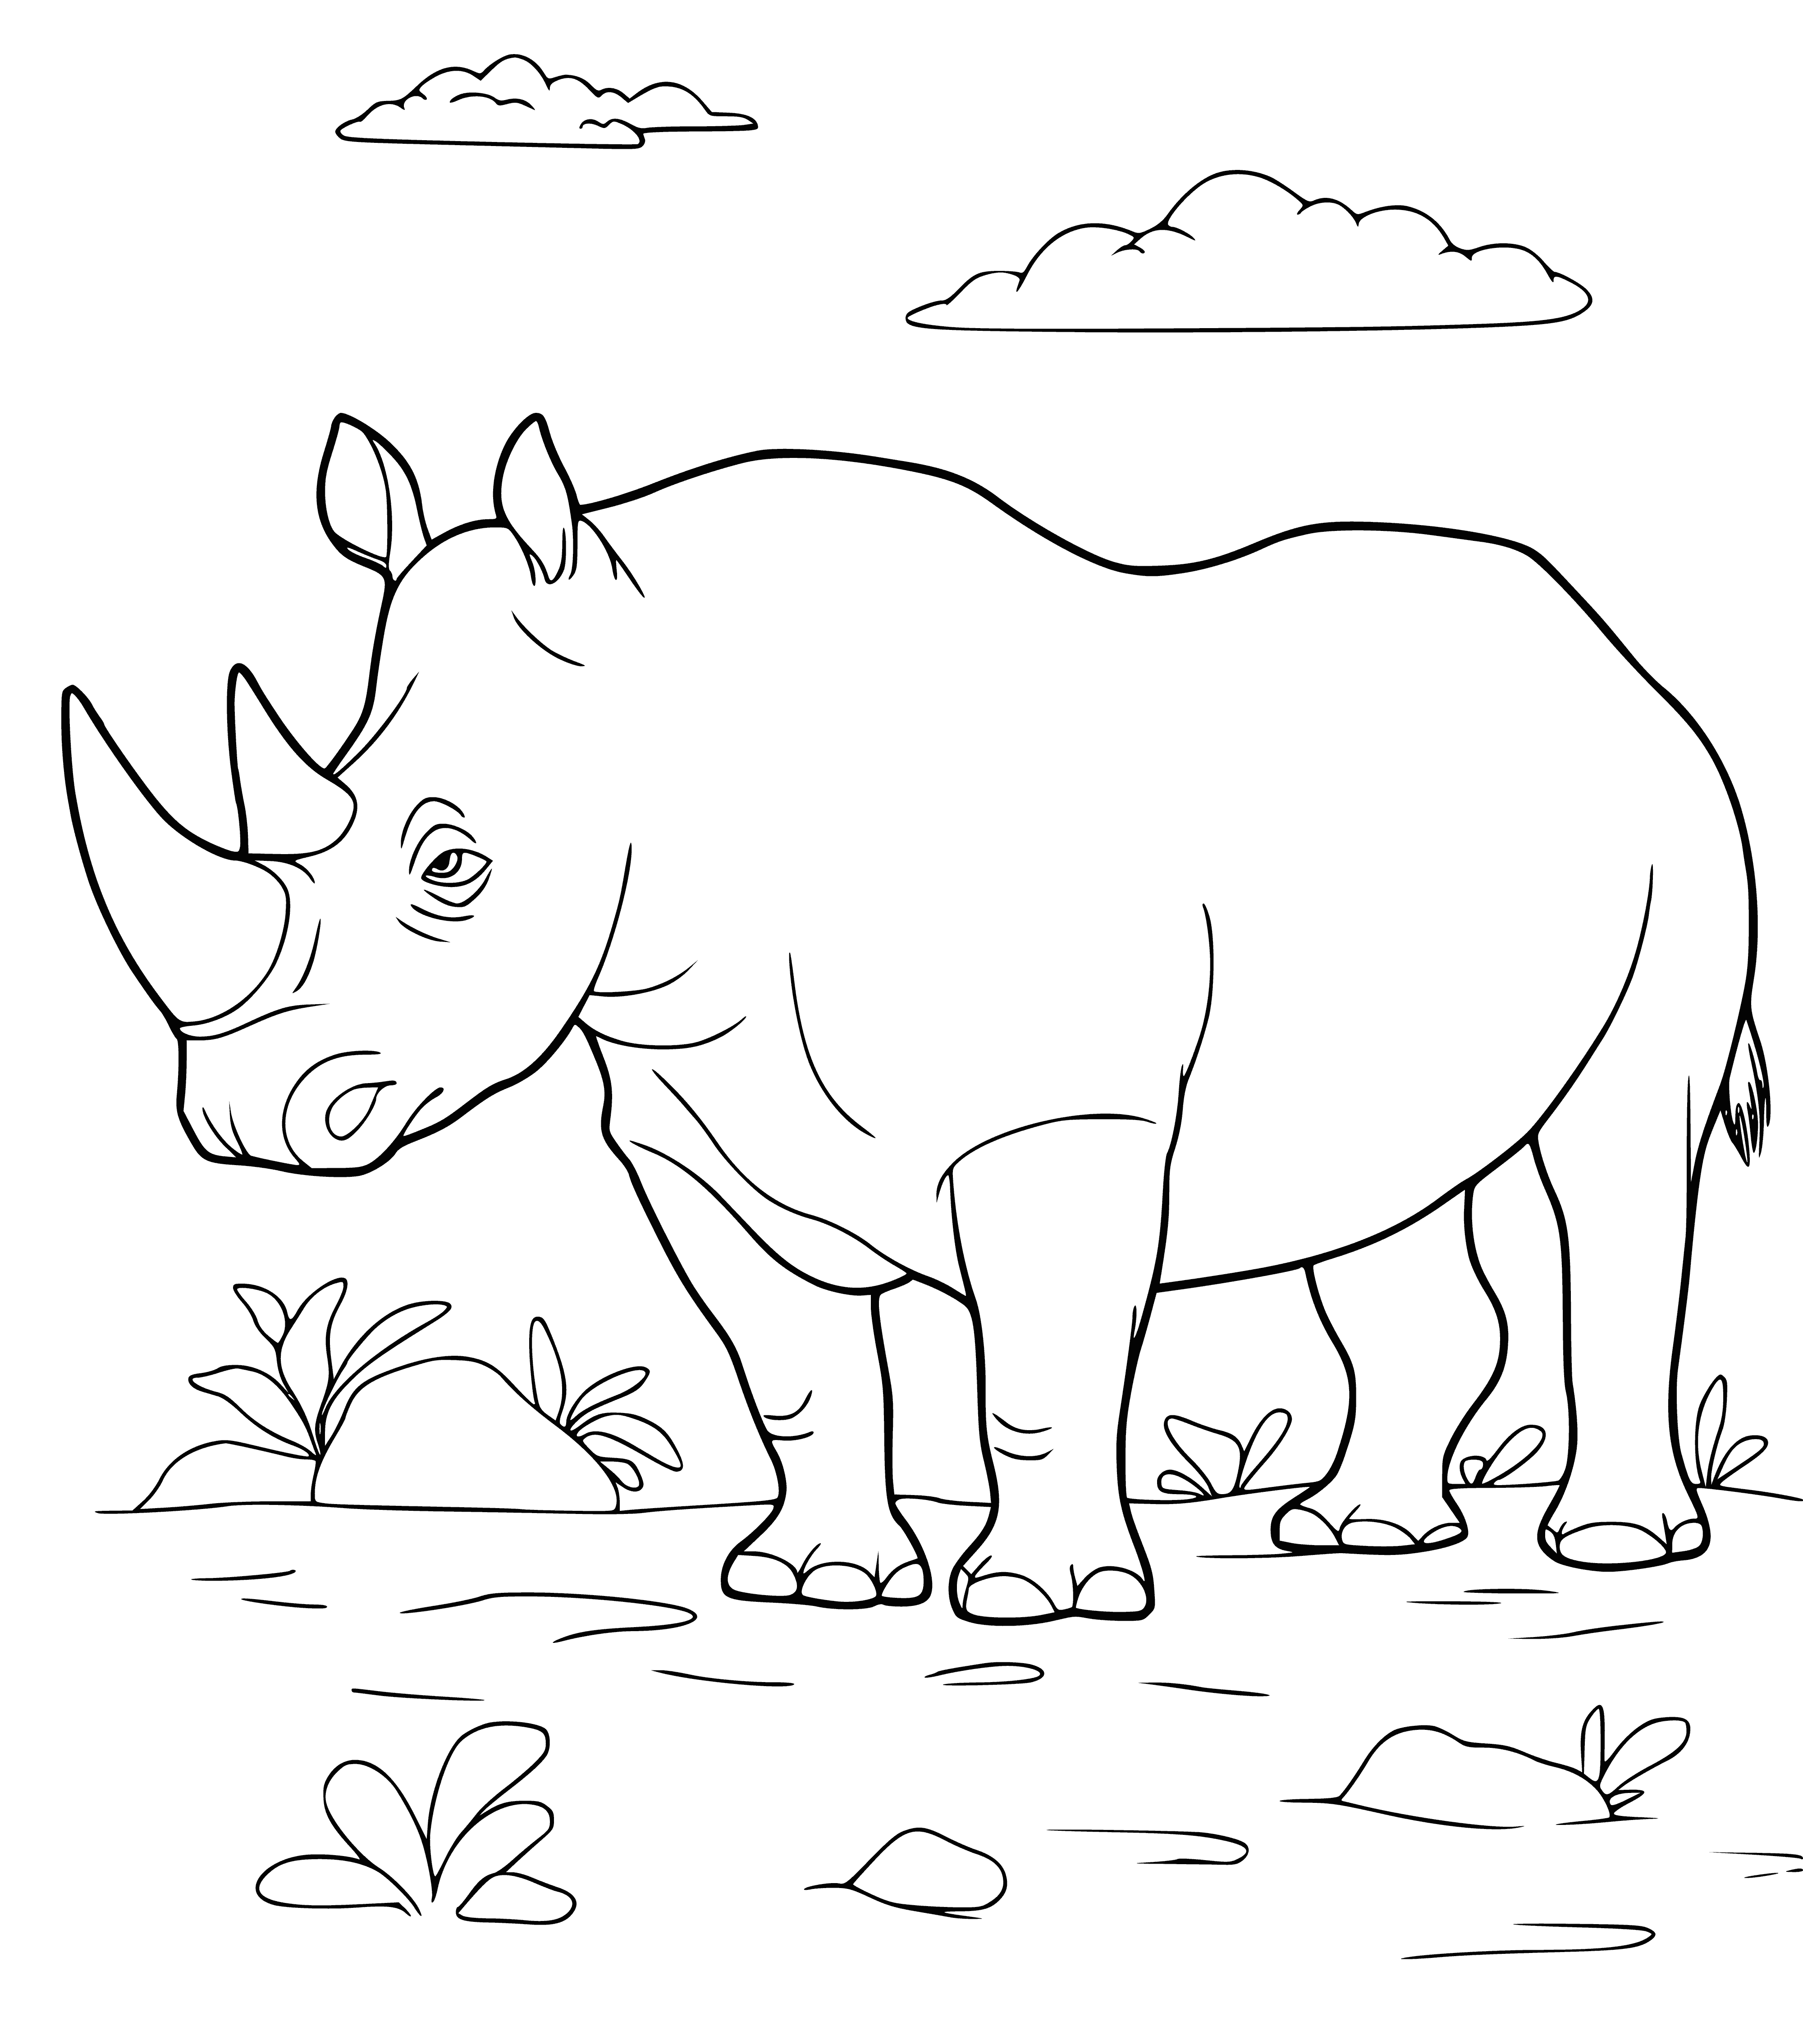 coloring page: A rhino is eating grass. It is big, gray, and has a long horn and short tail. #Safari #Rhino #Coloring